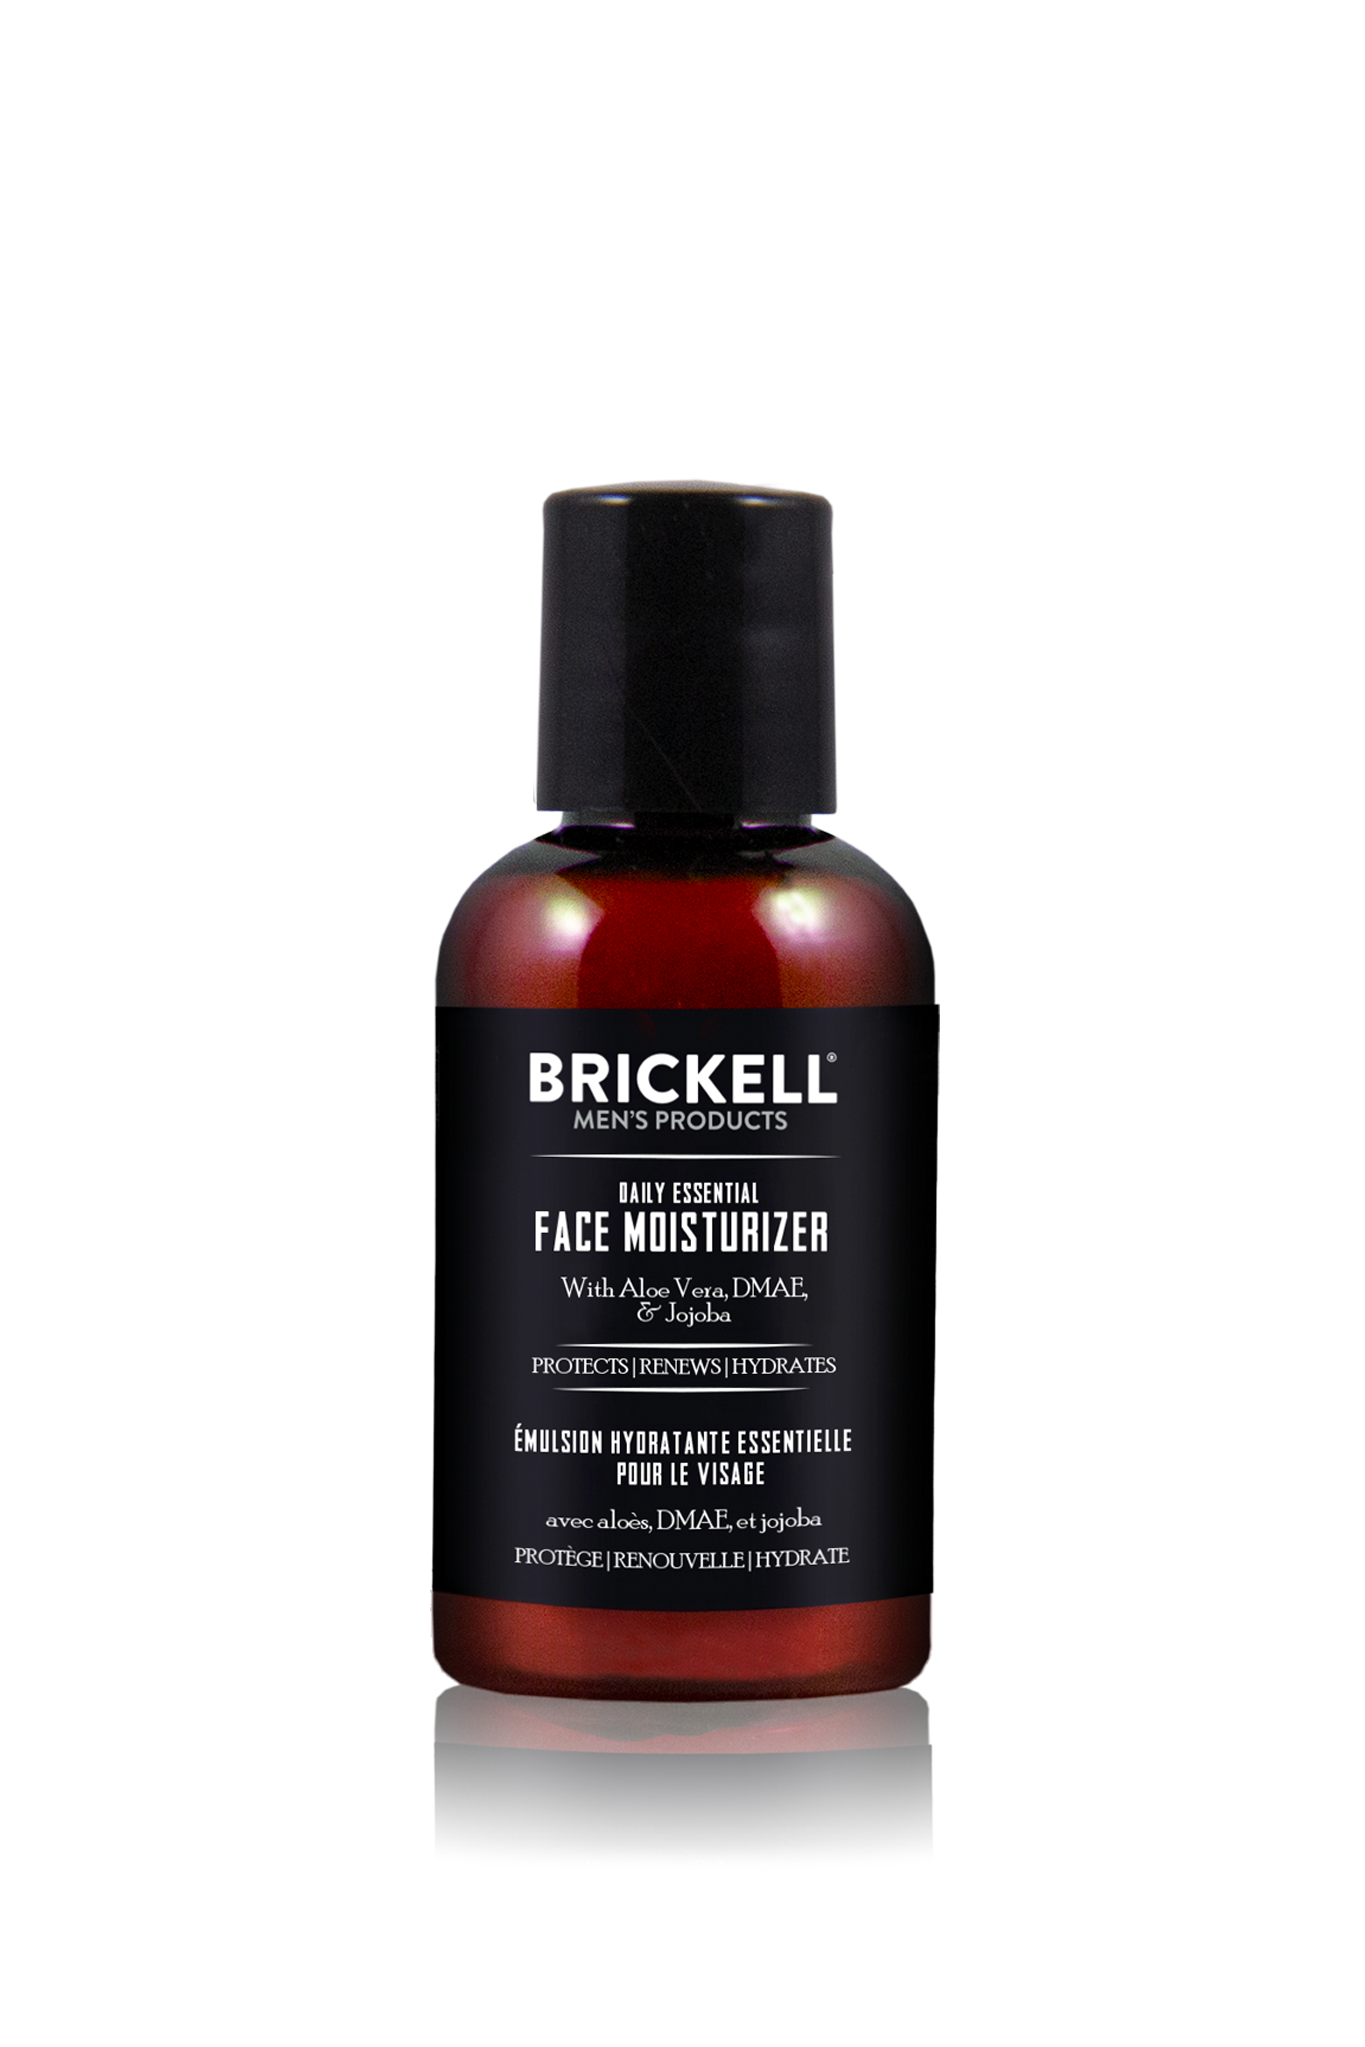 https://cdn.shopify.com/s/files/1/0513/2409/t/30/assets/TS_DAILY-ESSENTIAL-FACE-MOISTURIZER16843320519339.png?v=1684332056